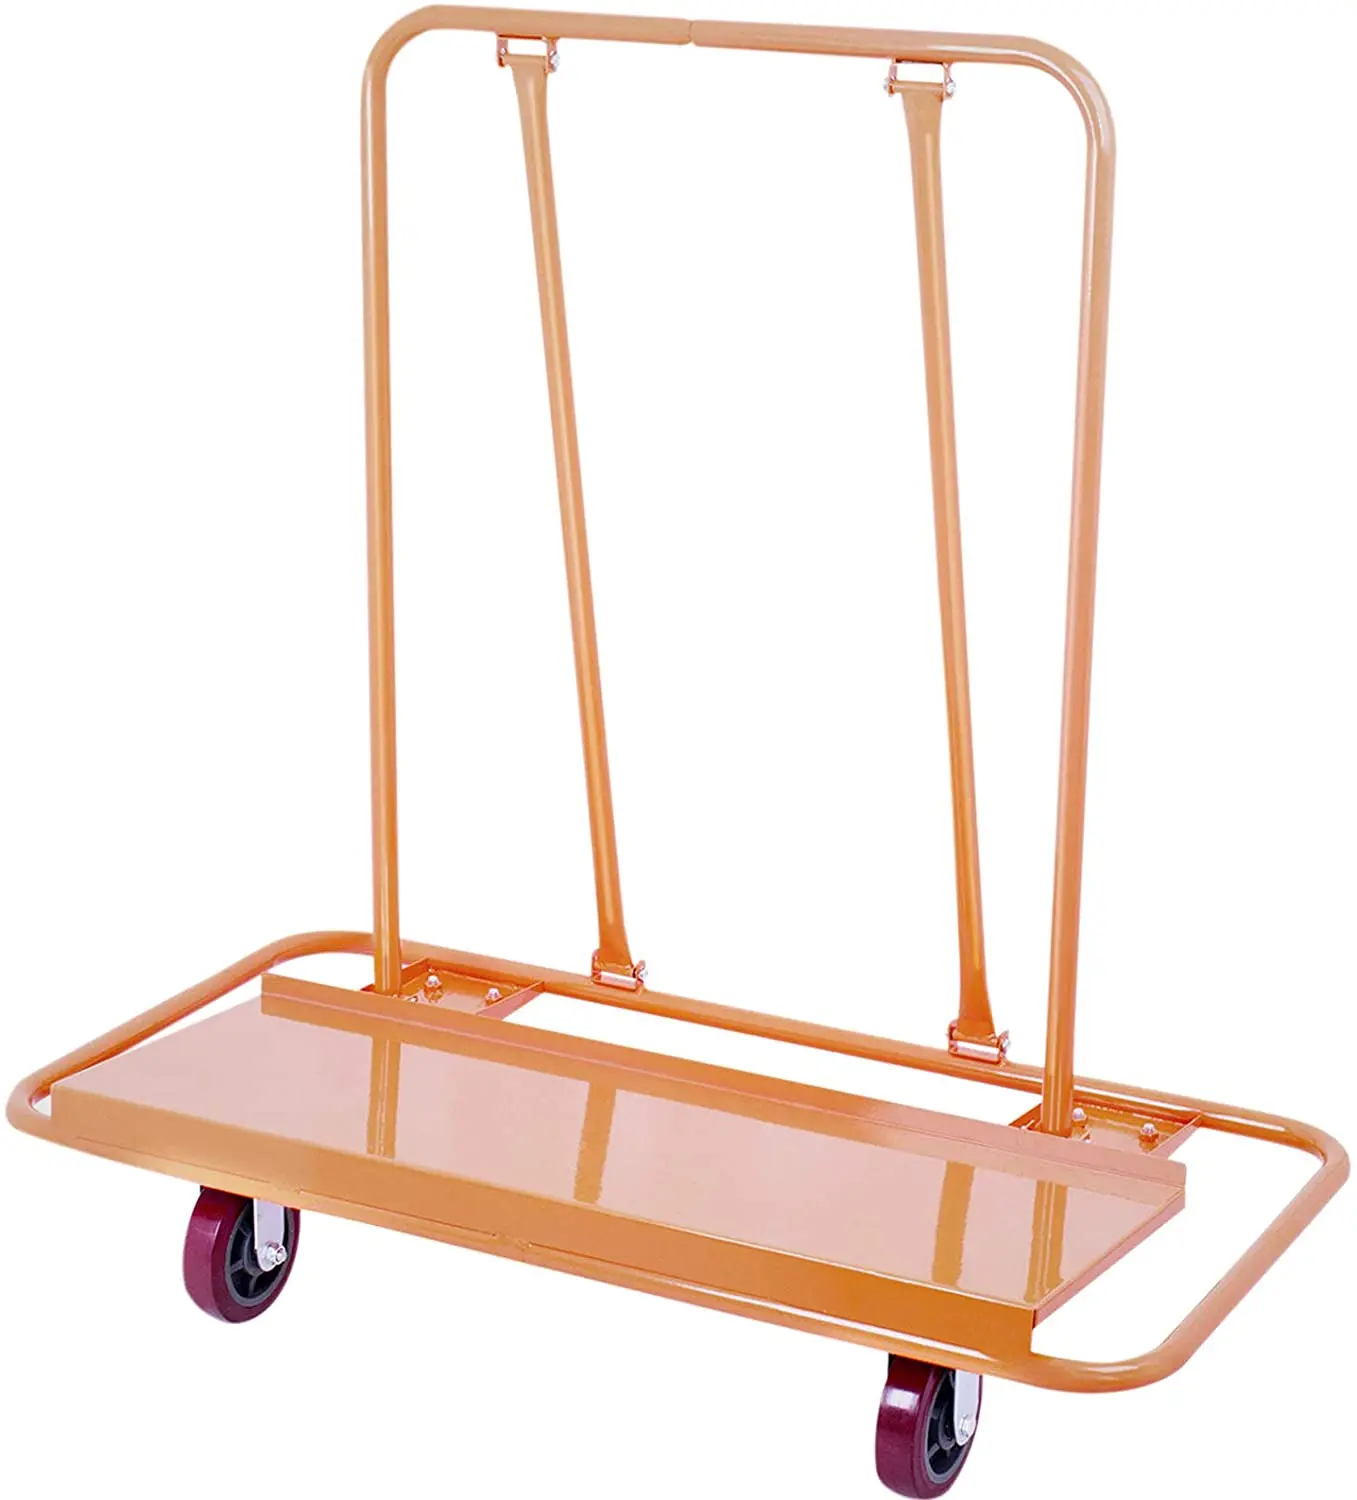 

Drywall Cart Dolly 3000Lbs Weight Capacity Heavy Duty Drywall Sheet Cart with Four Swivel Casters for Handling Wall Panels